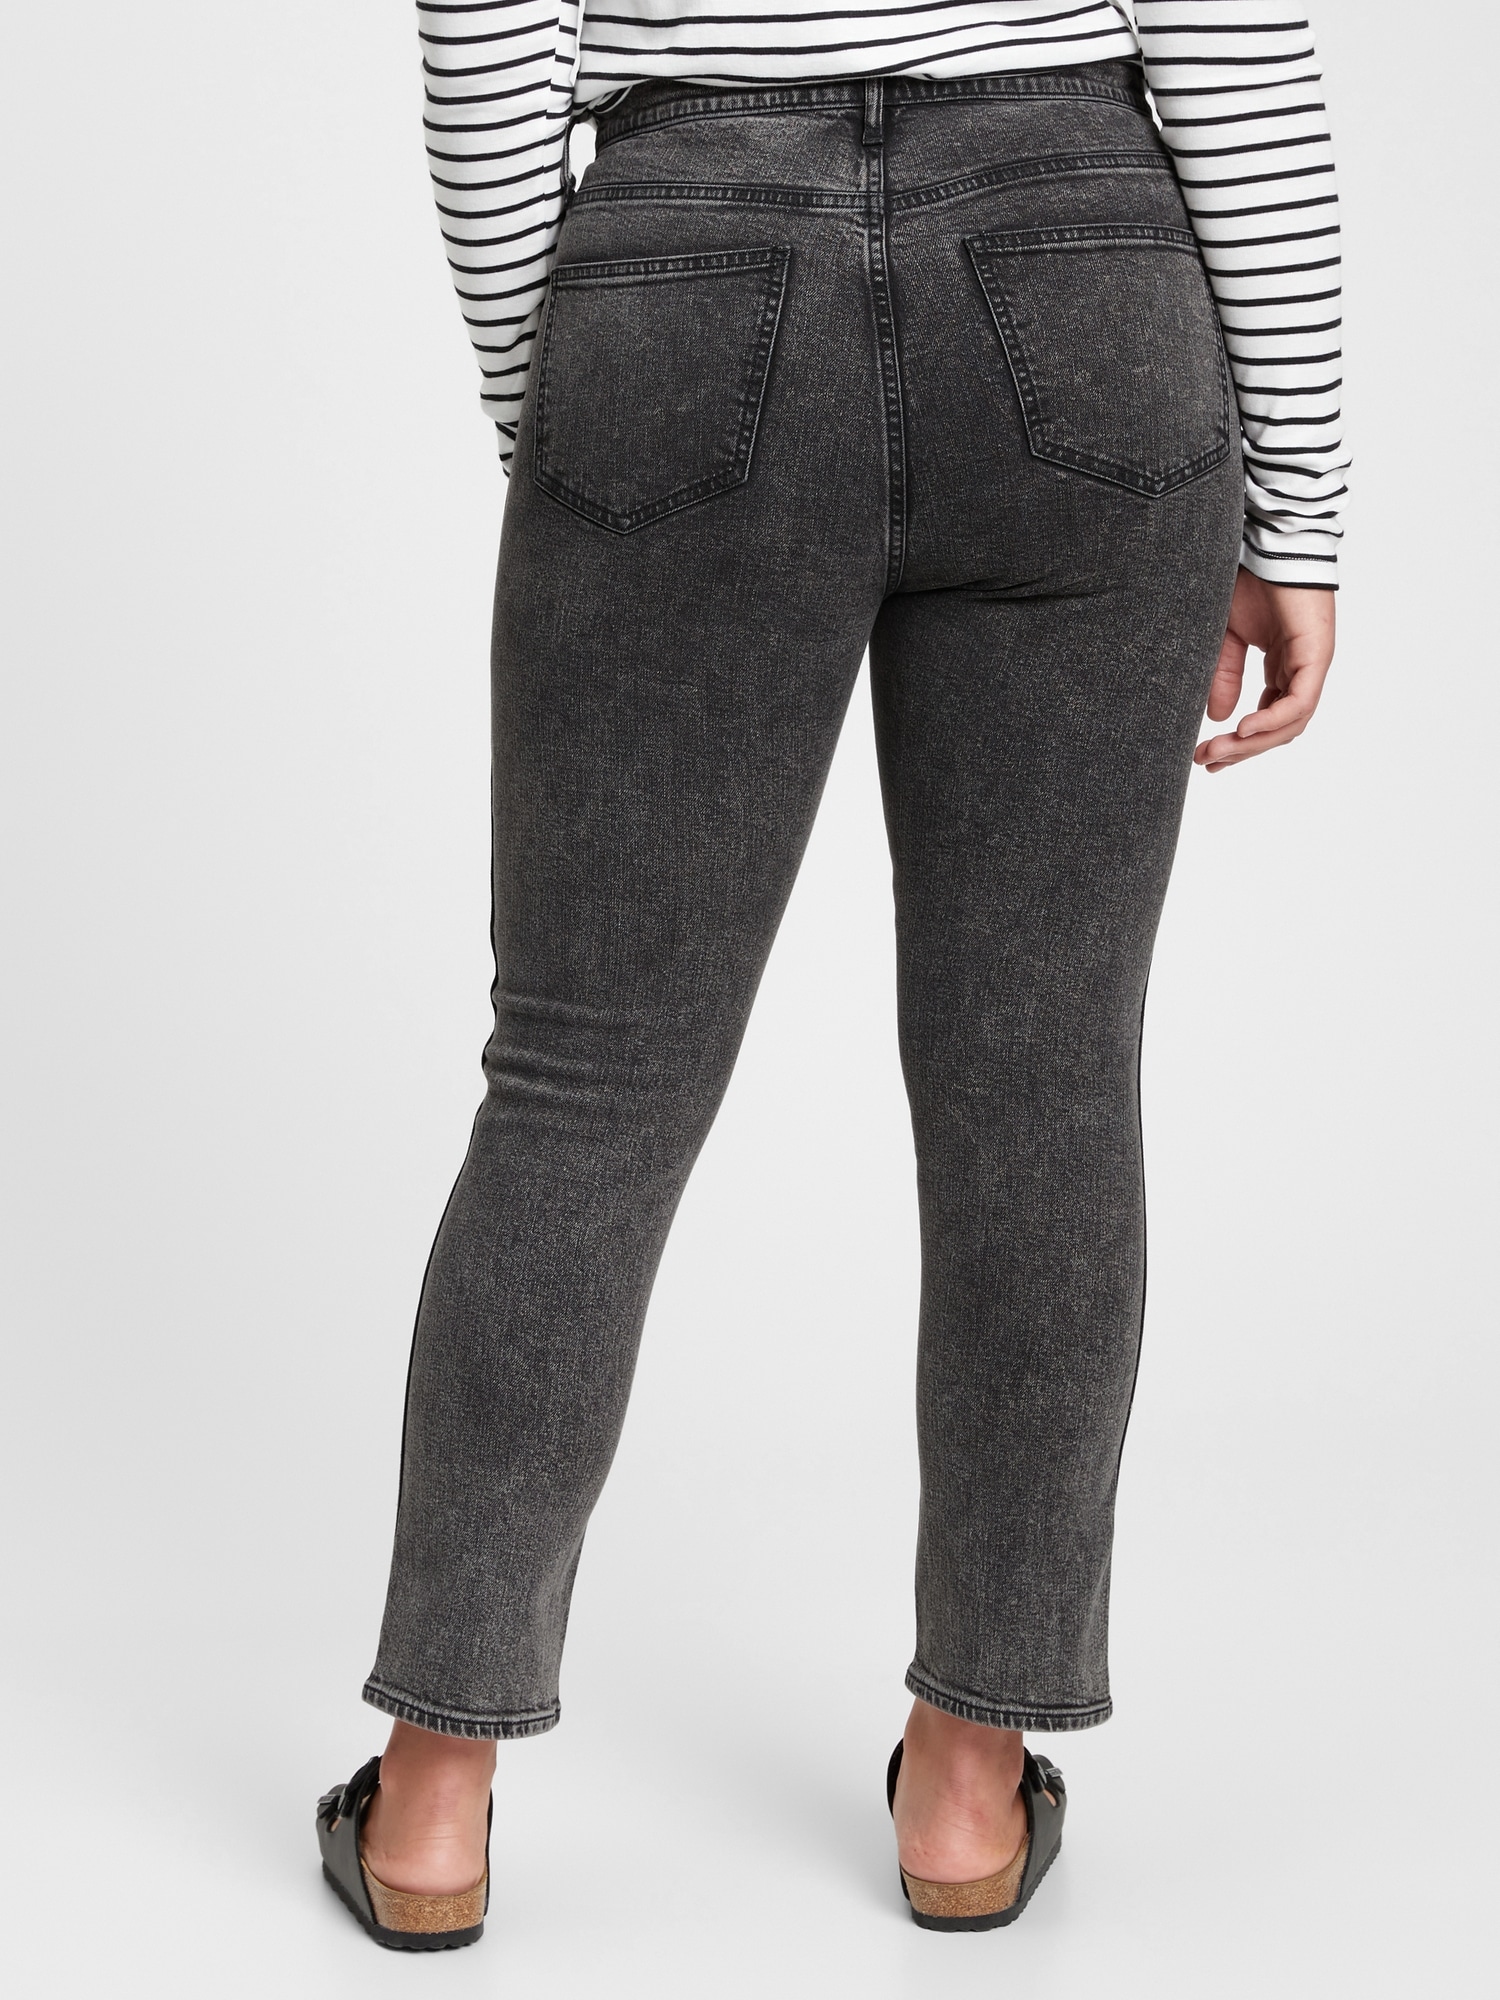 High Rise Vintage Slim Jeans With Washwell | Gap Factory